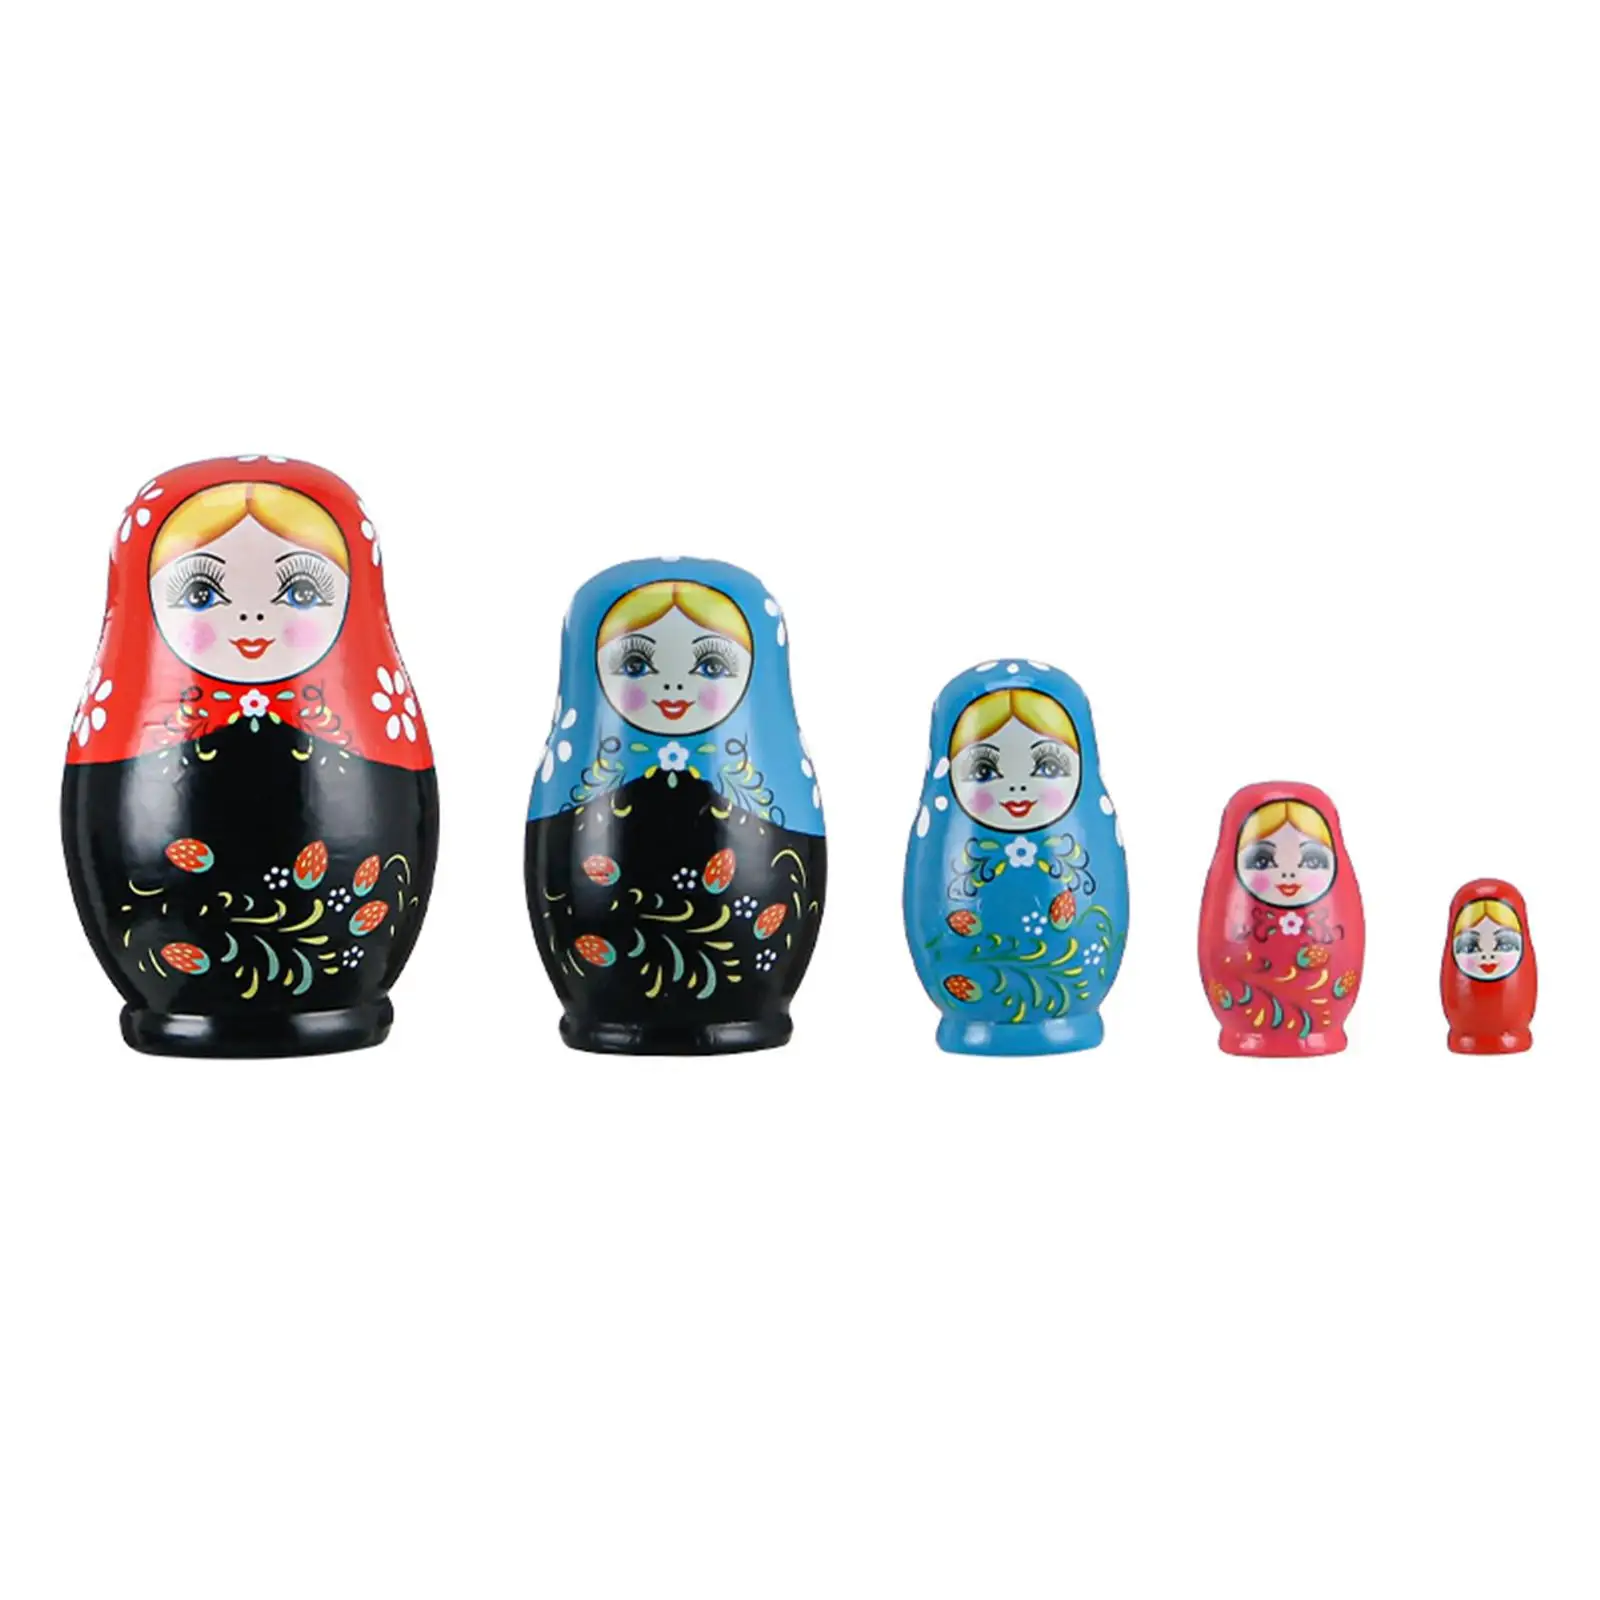 5 Pieces Handmade Russian Matryoshka Nesting Dolls Stacking Toys Wood Crafts for Kids Girls New Year Gift Home Decor